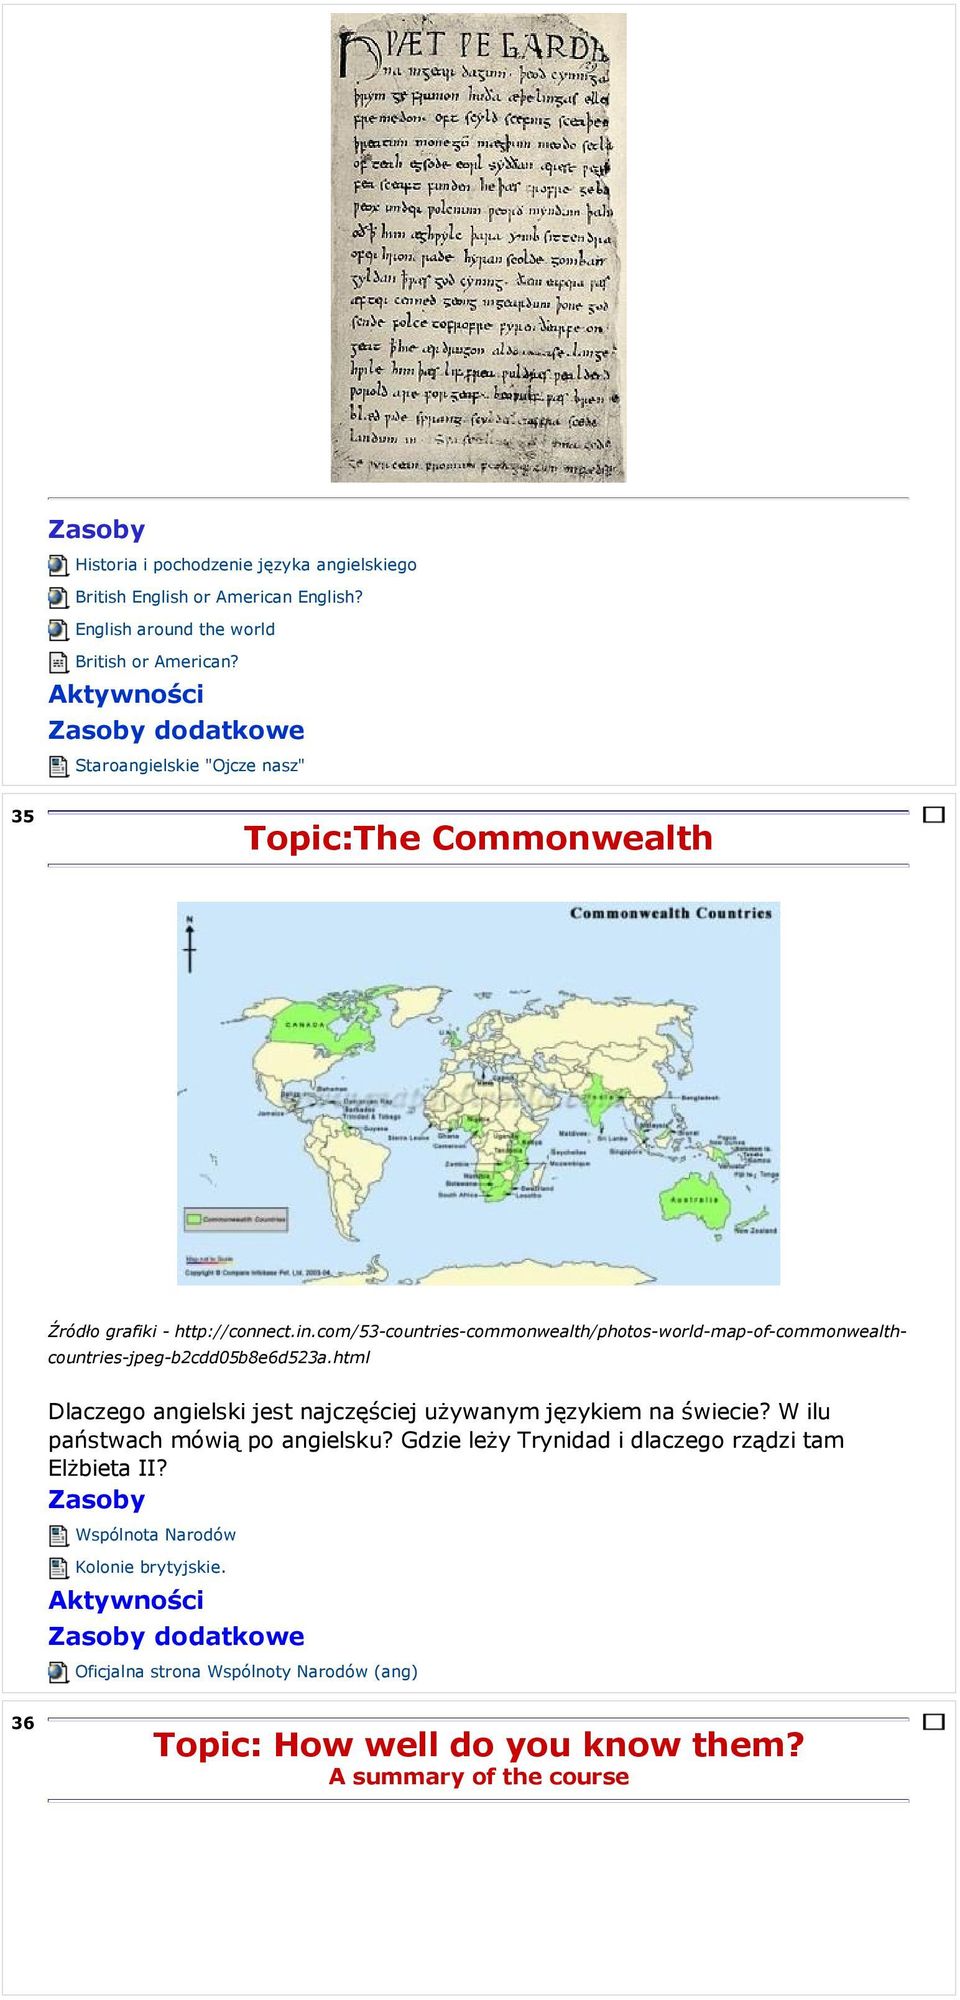 com/53-countries-commonwealth/photos-world-map-of-commonwealthcountries-jpeg-b2cdd05b8e6d523a.